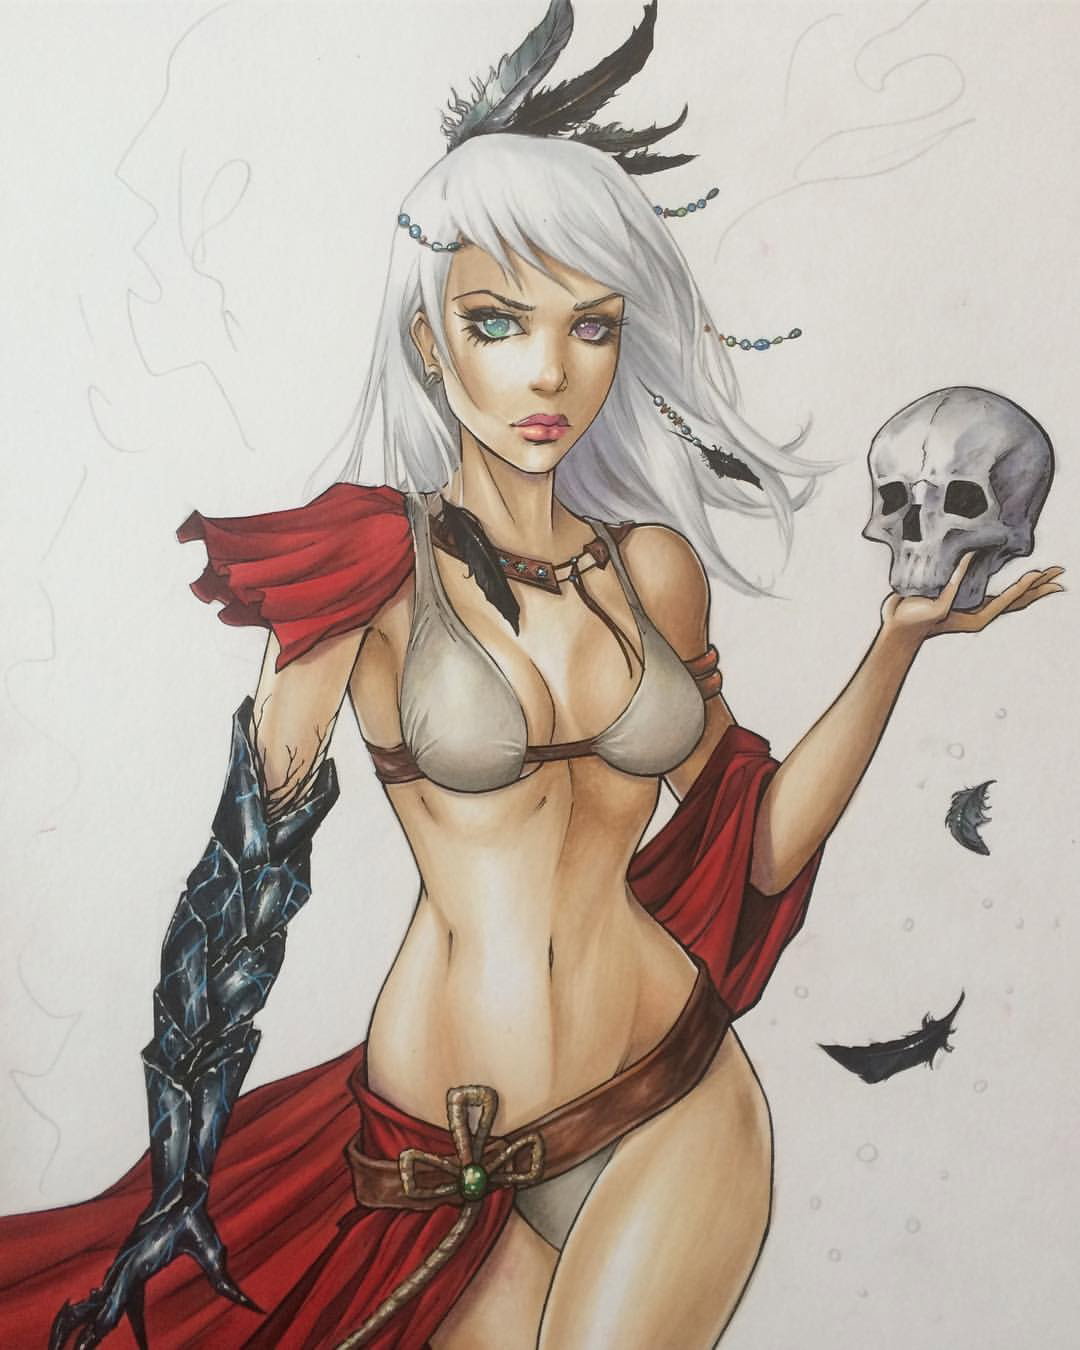 Photo by Justanotherguy with the username @Justanotherguy79,  May 20, 2017 at 2:36 AM and the text says 'aberrantkitty:

More WIP! Just gotta get the background in now. :-) 

#fantasyart #copic #copicmarkers #comicart #comics #sketch #instaart #shaman #witch #colletteturner'